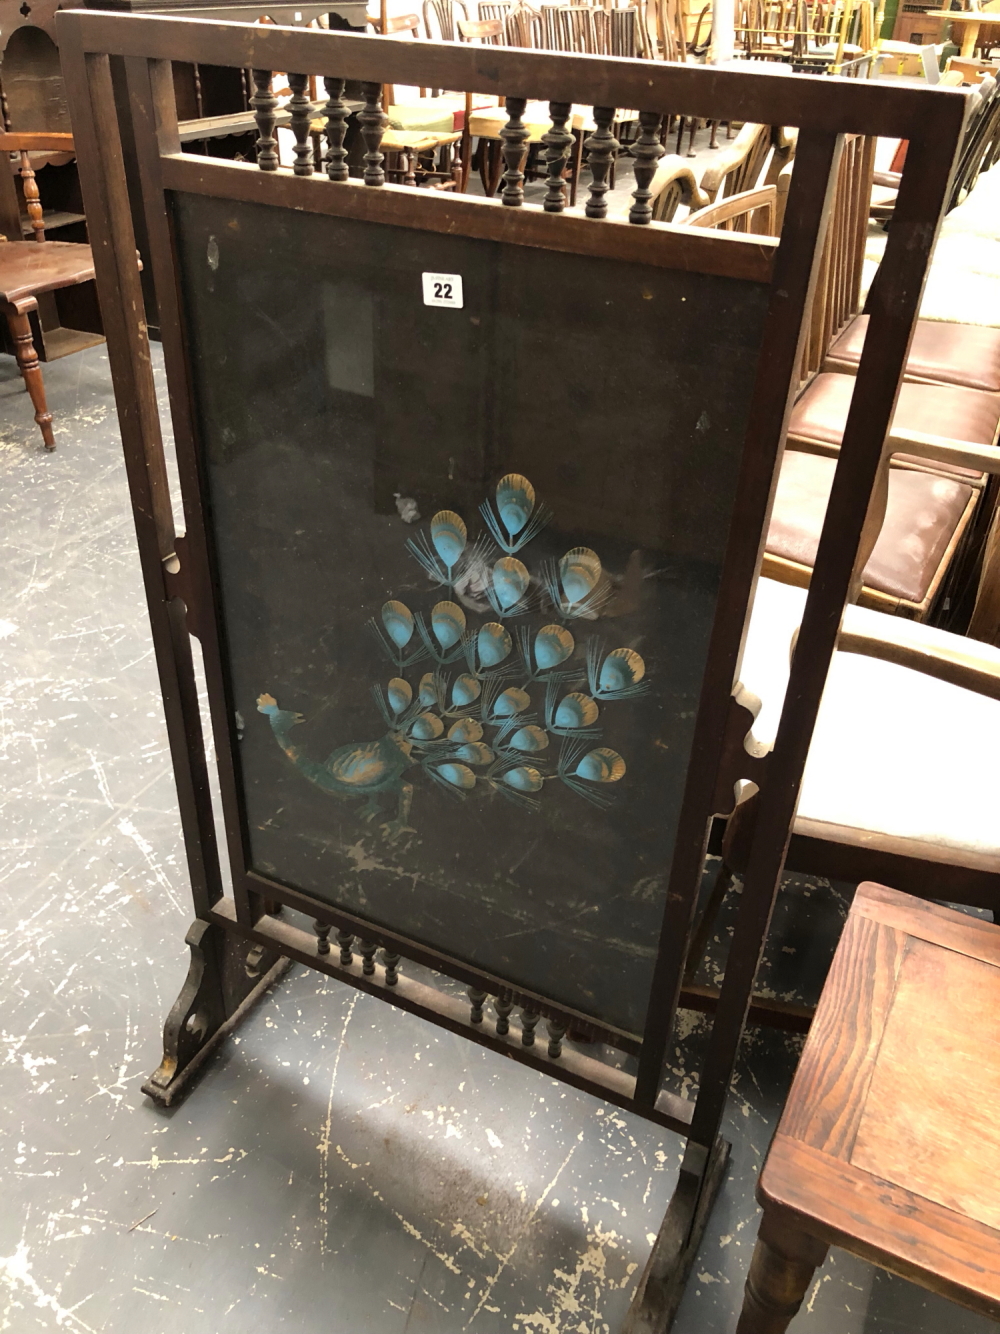 AN EDWARDIAN FIRE SCREEN DECORATED WITH A EXOTIC BIRD.